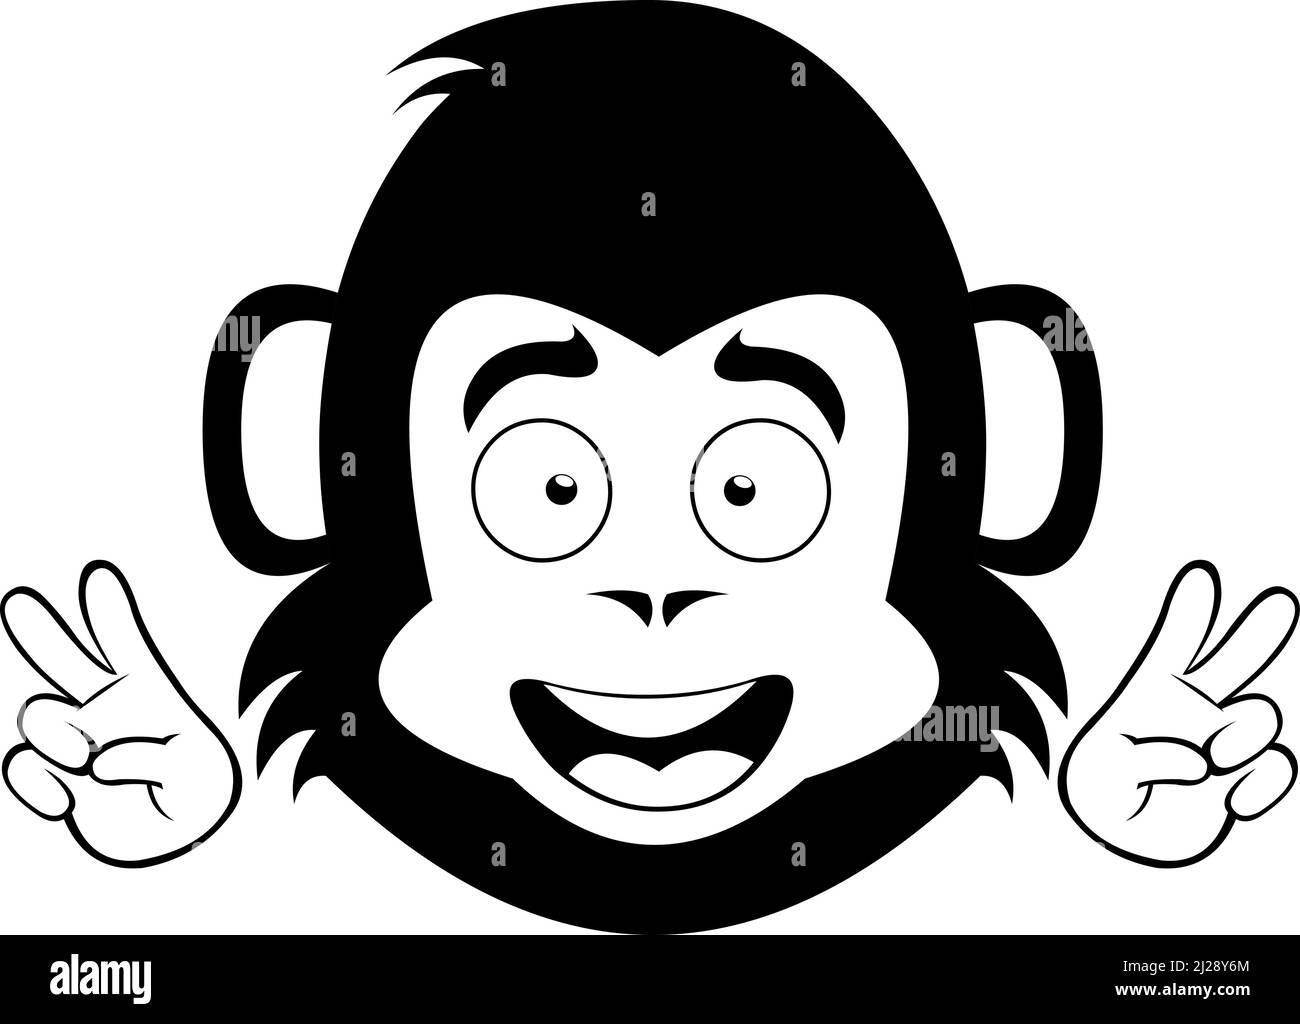 Vector illustration of the face of a cartoon monkey or gorilla making the classic love and peace or v victory gesture with his hands, drawn in black a Stock Vector